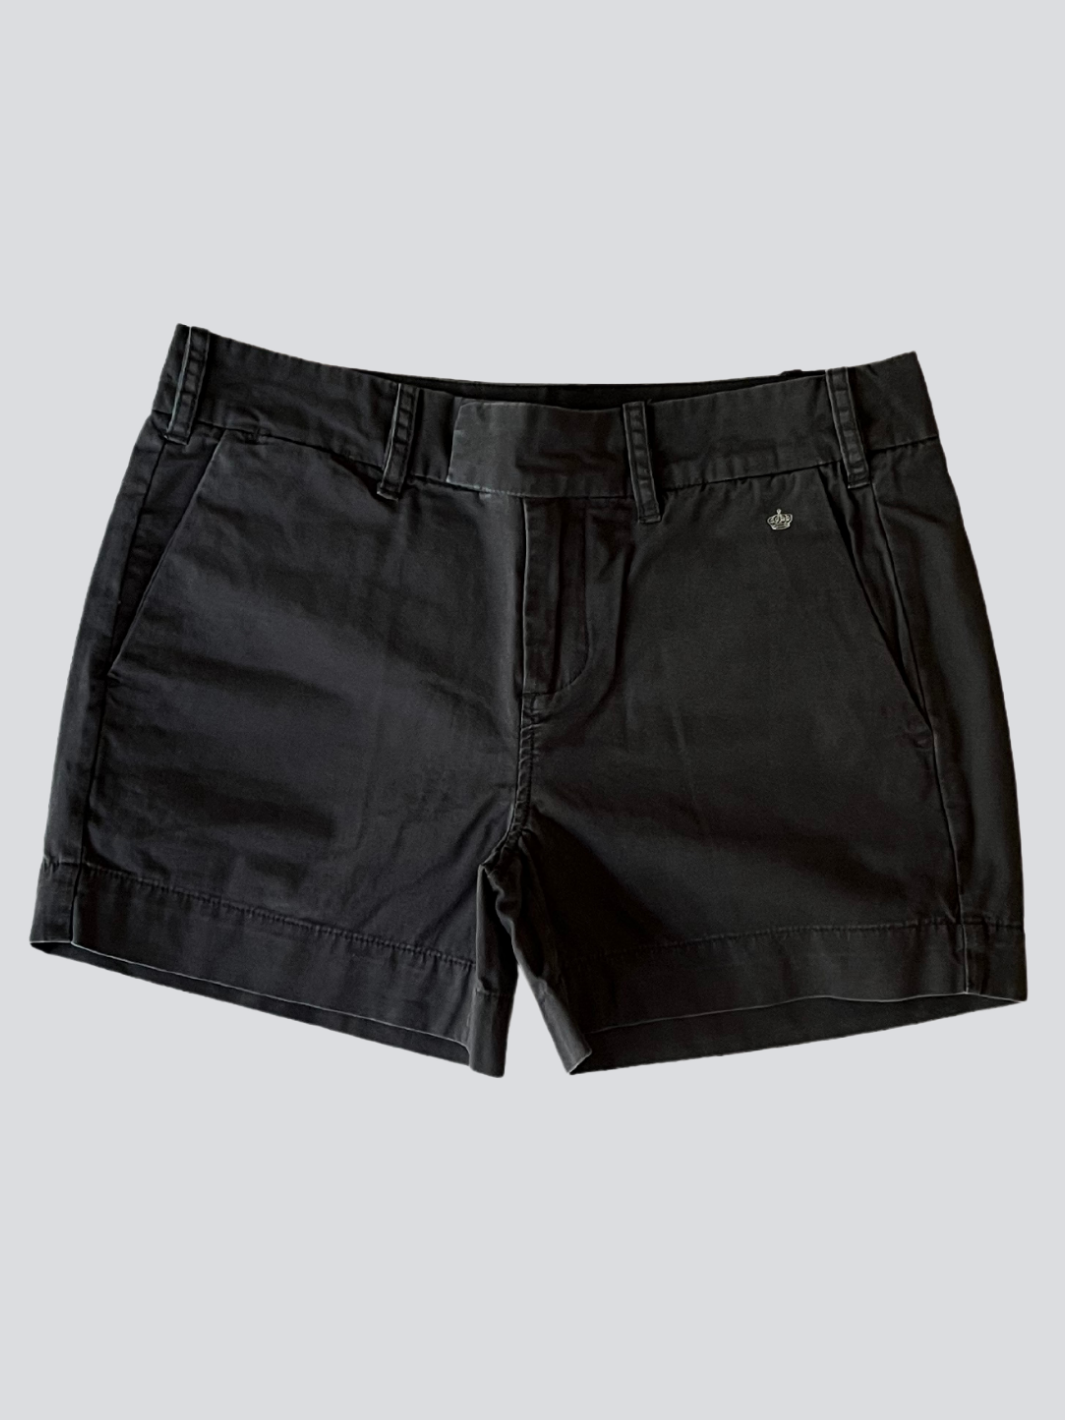 4" SHORTS IN WASHED BLACK - Romi Boutique